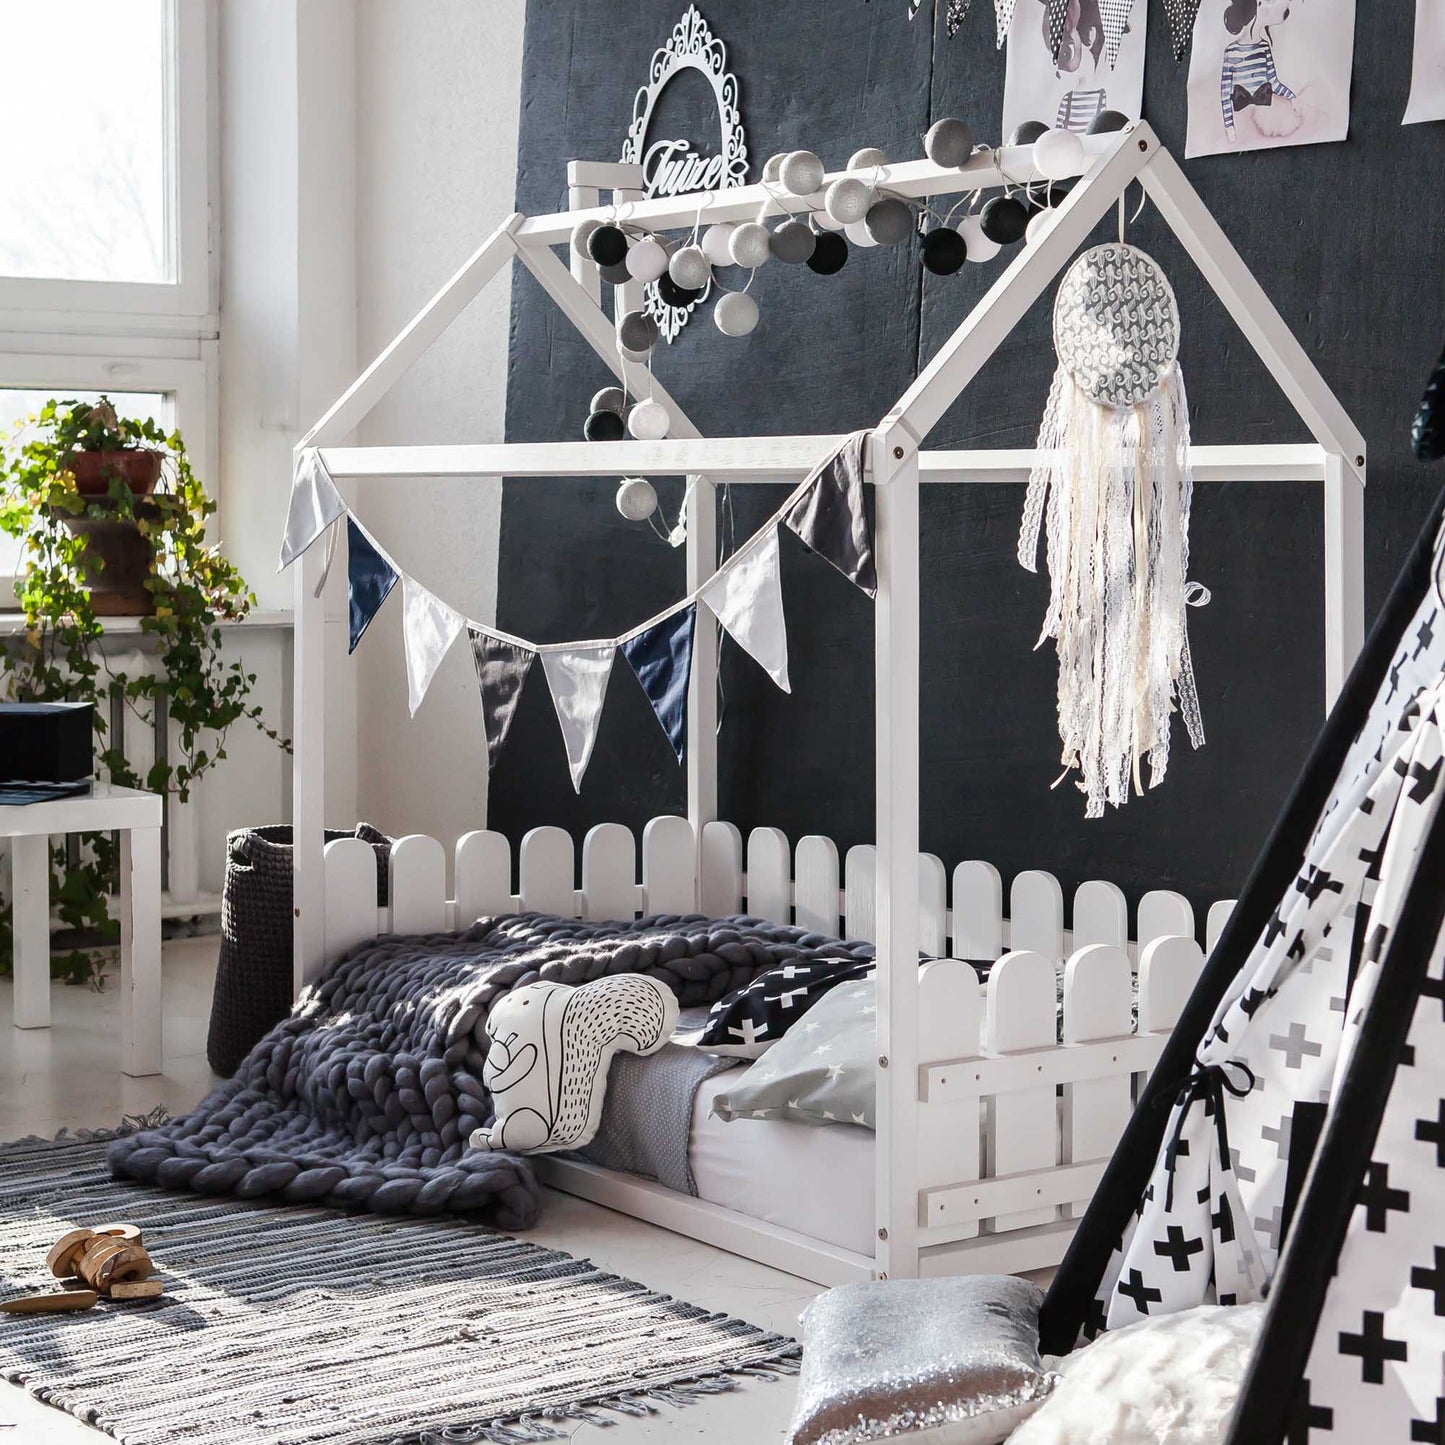 A child's room with a teepee, blankets, and pillows on a Floor house-frame bed with 3-sided picket fence rails.